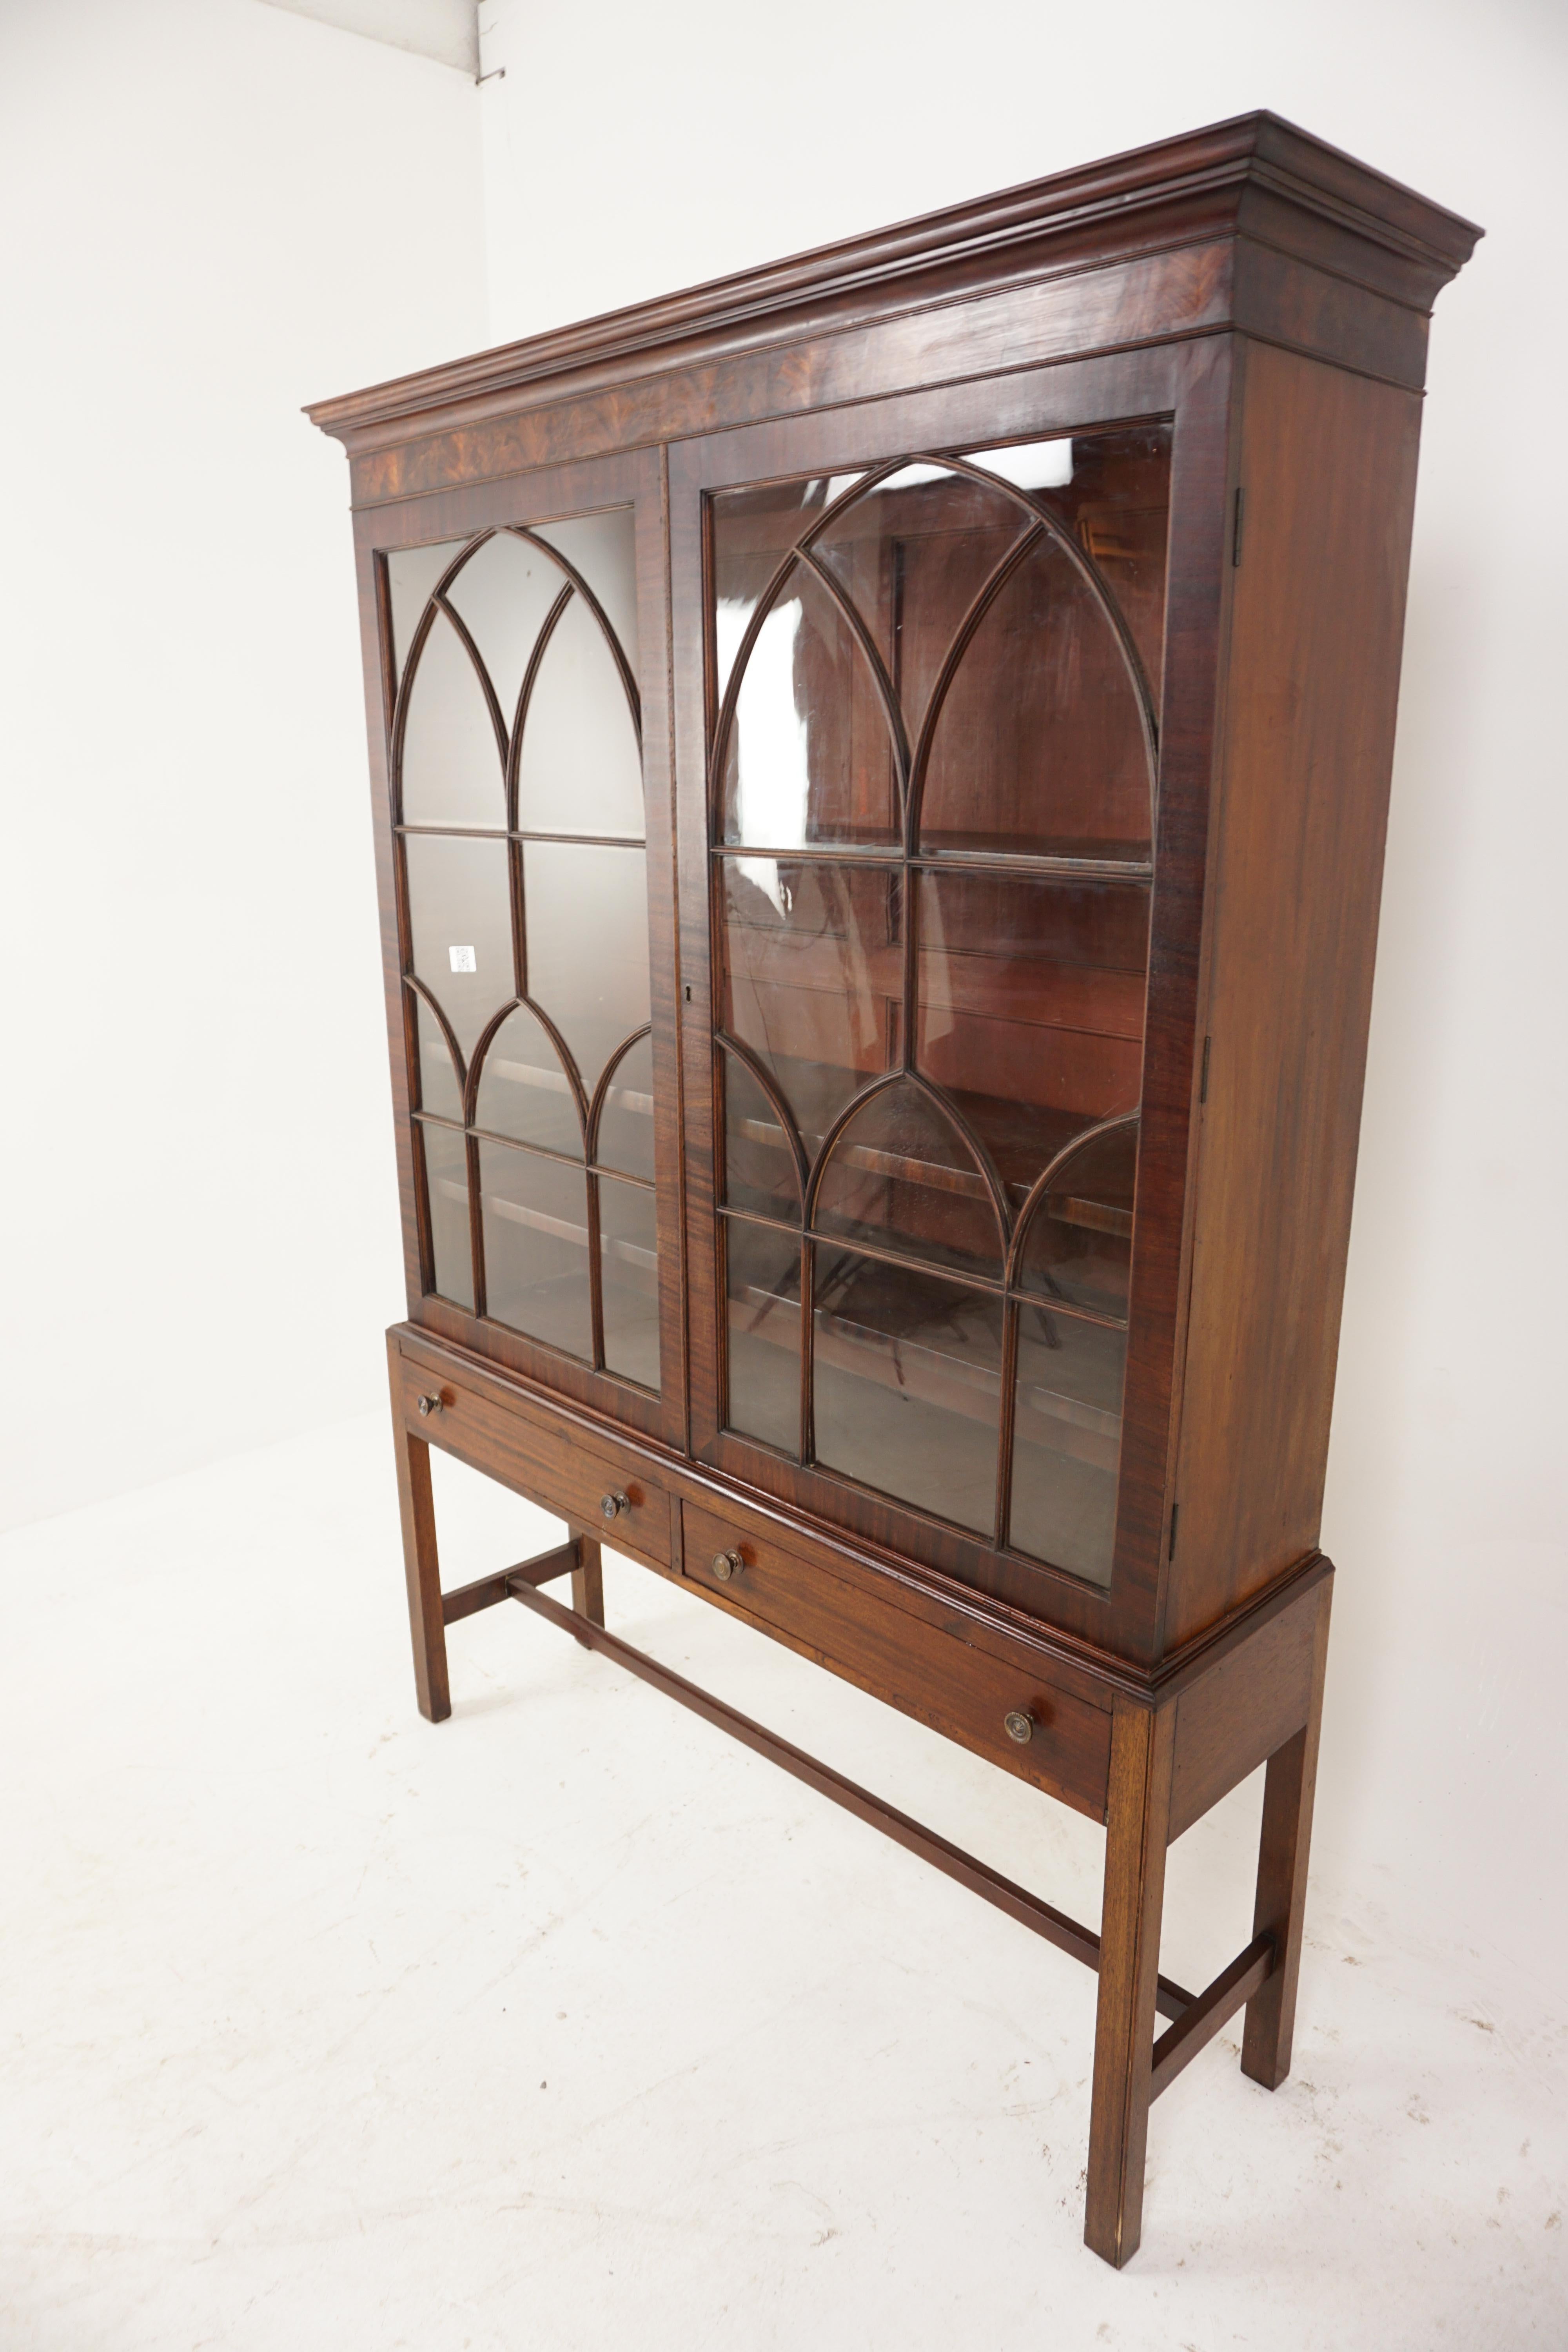 Antique Walnut Bookcase, Glass Fronted Bookshelf, Display on Later Stand, Scotland 1840, H964

Scotland 1840
Solid Walnut
Original Finish
Moulded Cornice On Top 
Pair of Original Glass Doors with Shaped Molding on the Front
Sitting on the